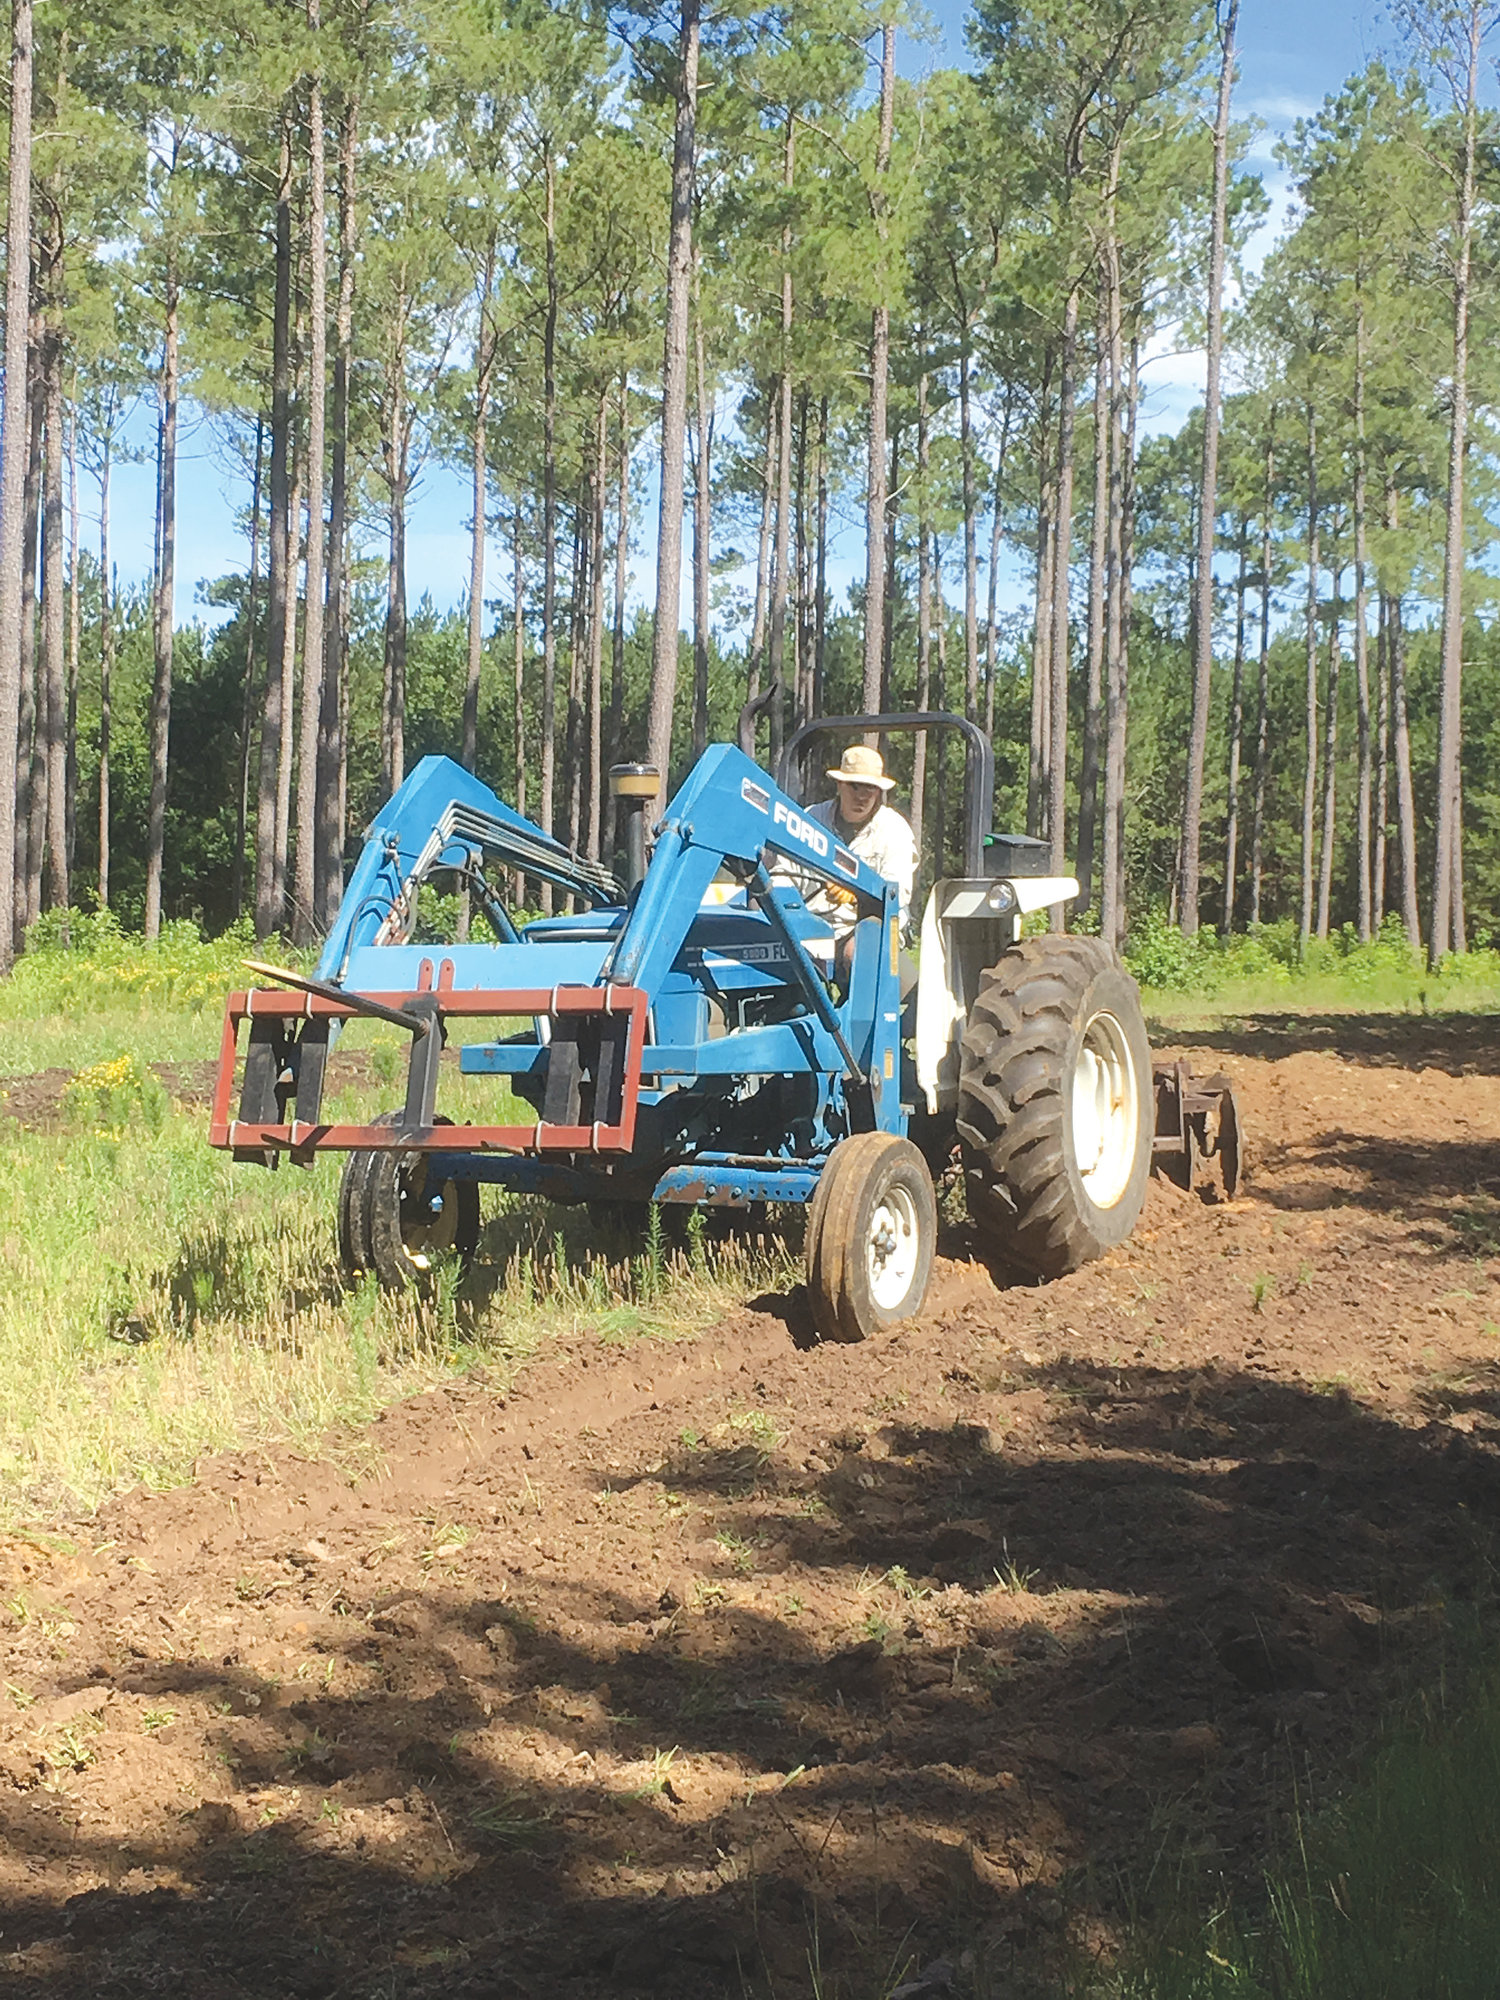 Ed plows a new food plot of chufa for turkeys and other wildlife.